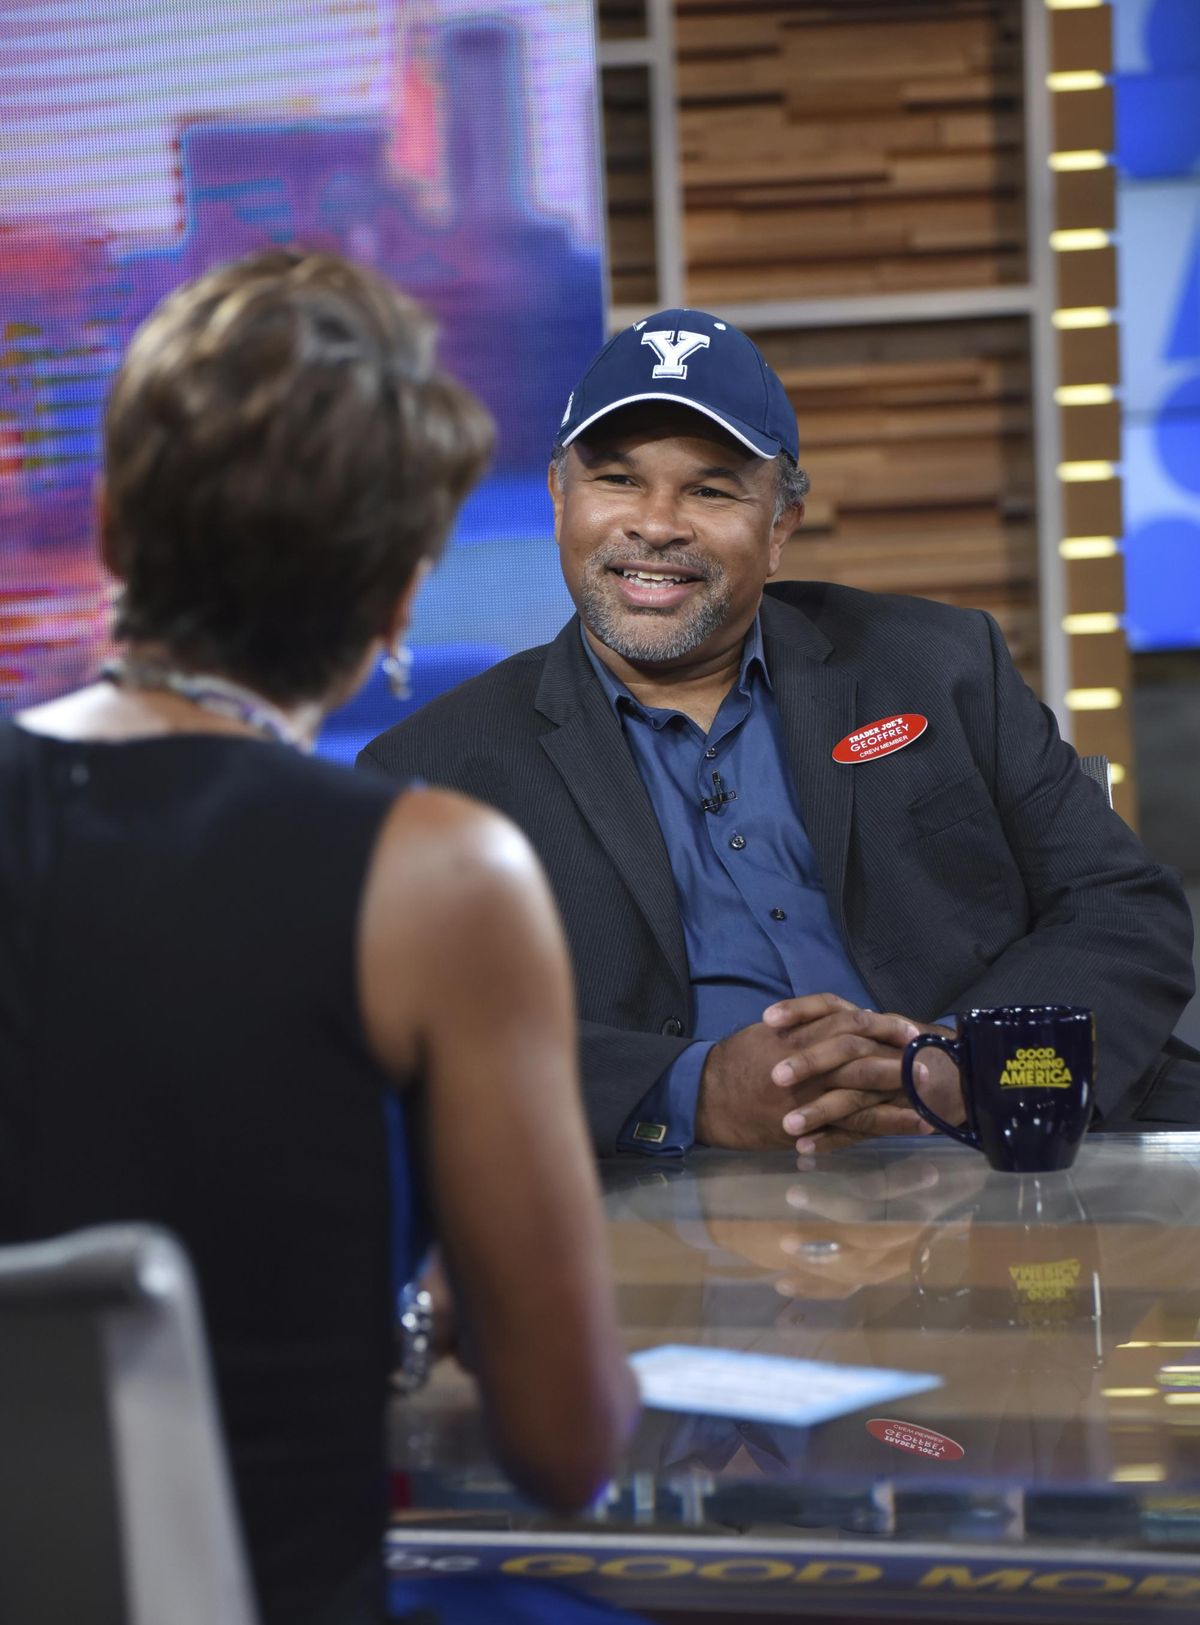 This image released by ABC shows co-host Robin Roberts, left, with “The Cosby Show” actor Geoffrey Owens during an interview on “Good Morning America,” Tuesday, Sept. 4, 2018, in New York. Owens says hes thankful for the support he has received since photos of him working a regular job at a grocery store showed up on news sites. He said on ABCs Good Morning America that he did feel some people were trying to job shame him. But he stressed that every job is worthwhile and valuable. (Paula Lobo / AP)